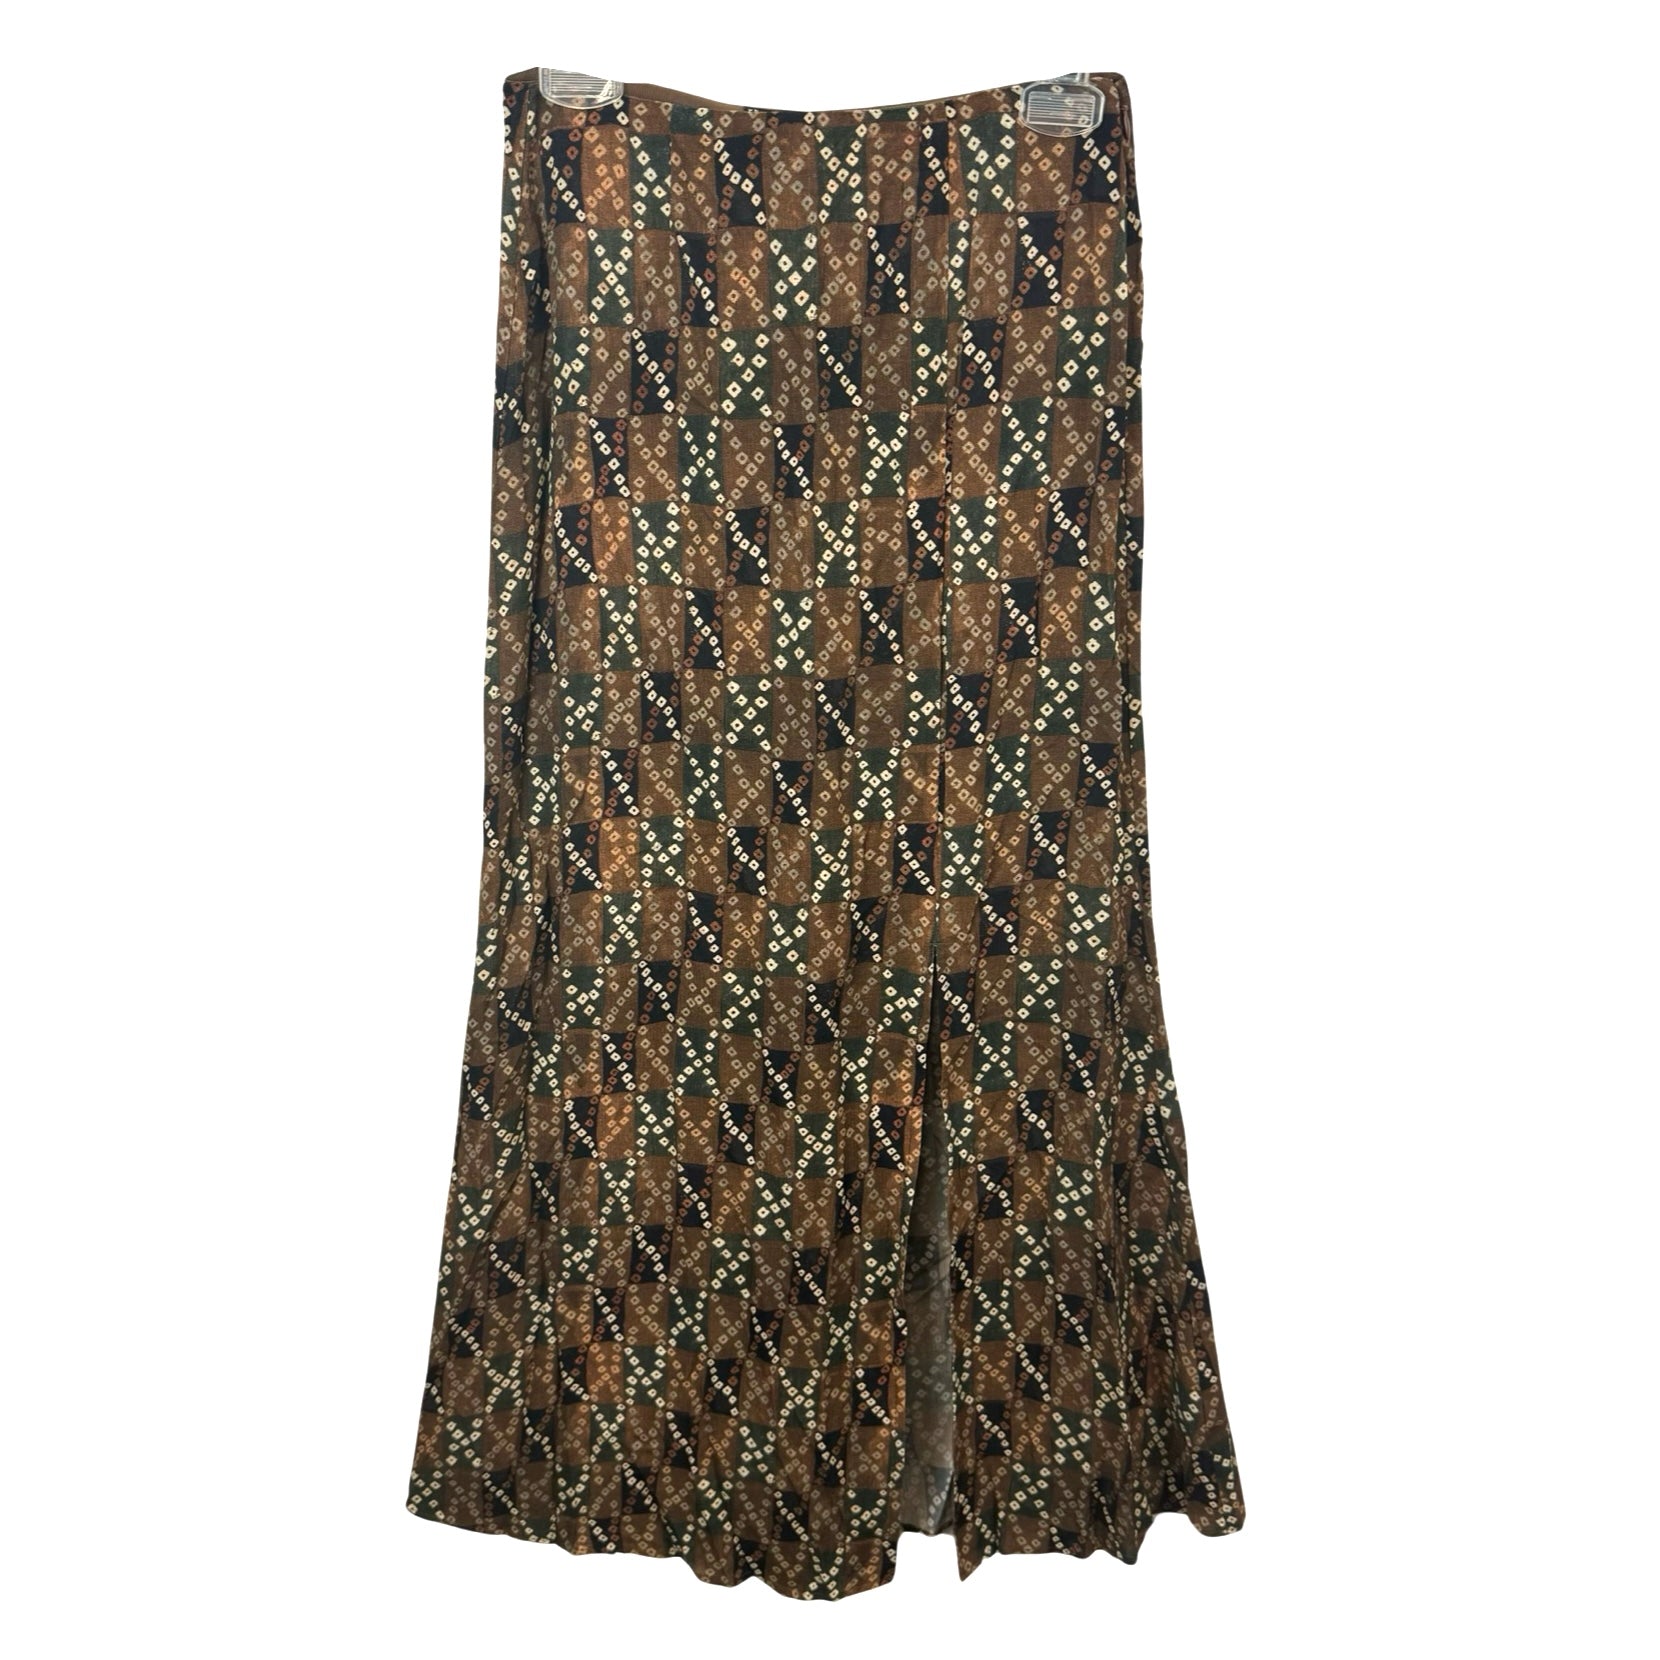 Peruvian Connection Side Slit Maxi Skirt